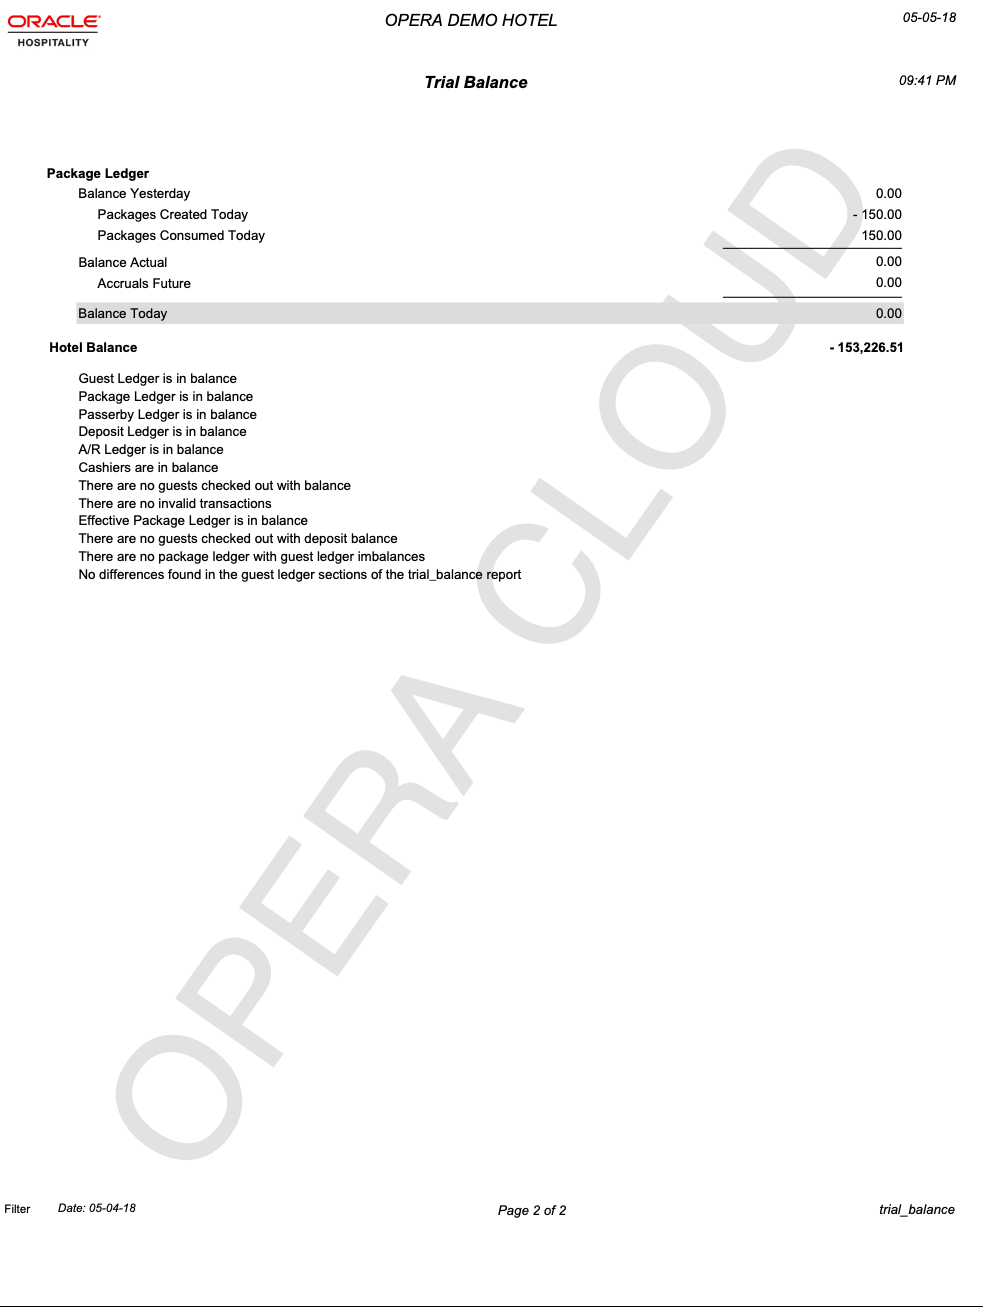 The second page report image shows the Package Ledger transaction, the Hotel Balance, and then lists the balance status of each ledger on the report as balanced.